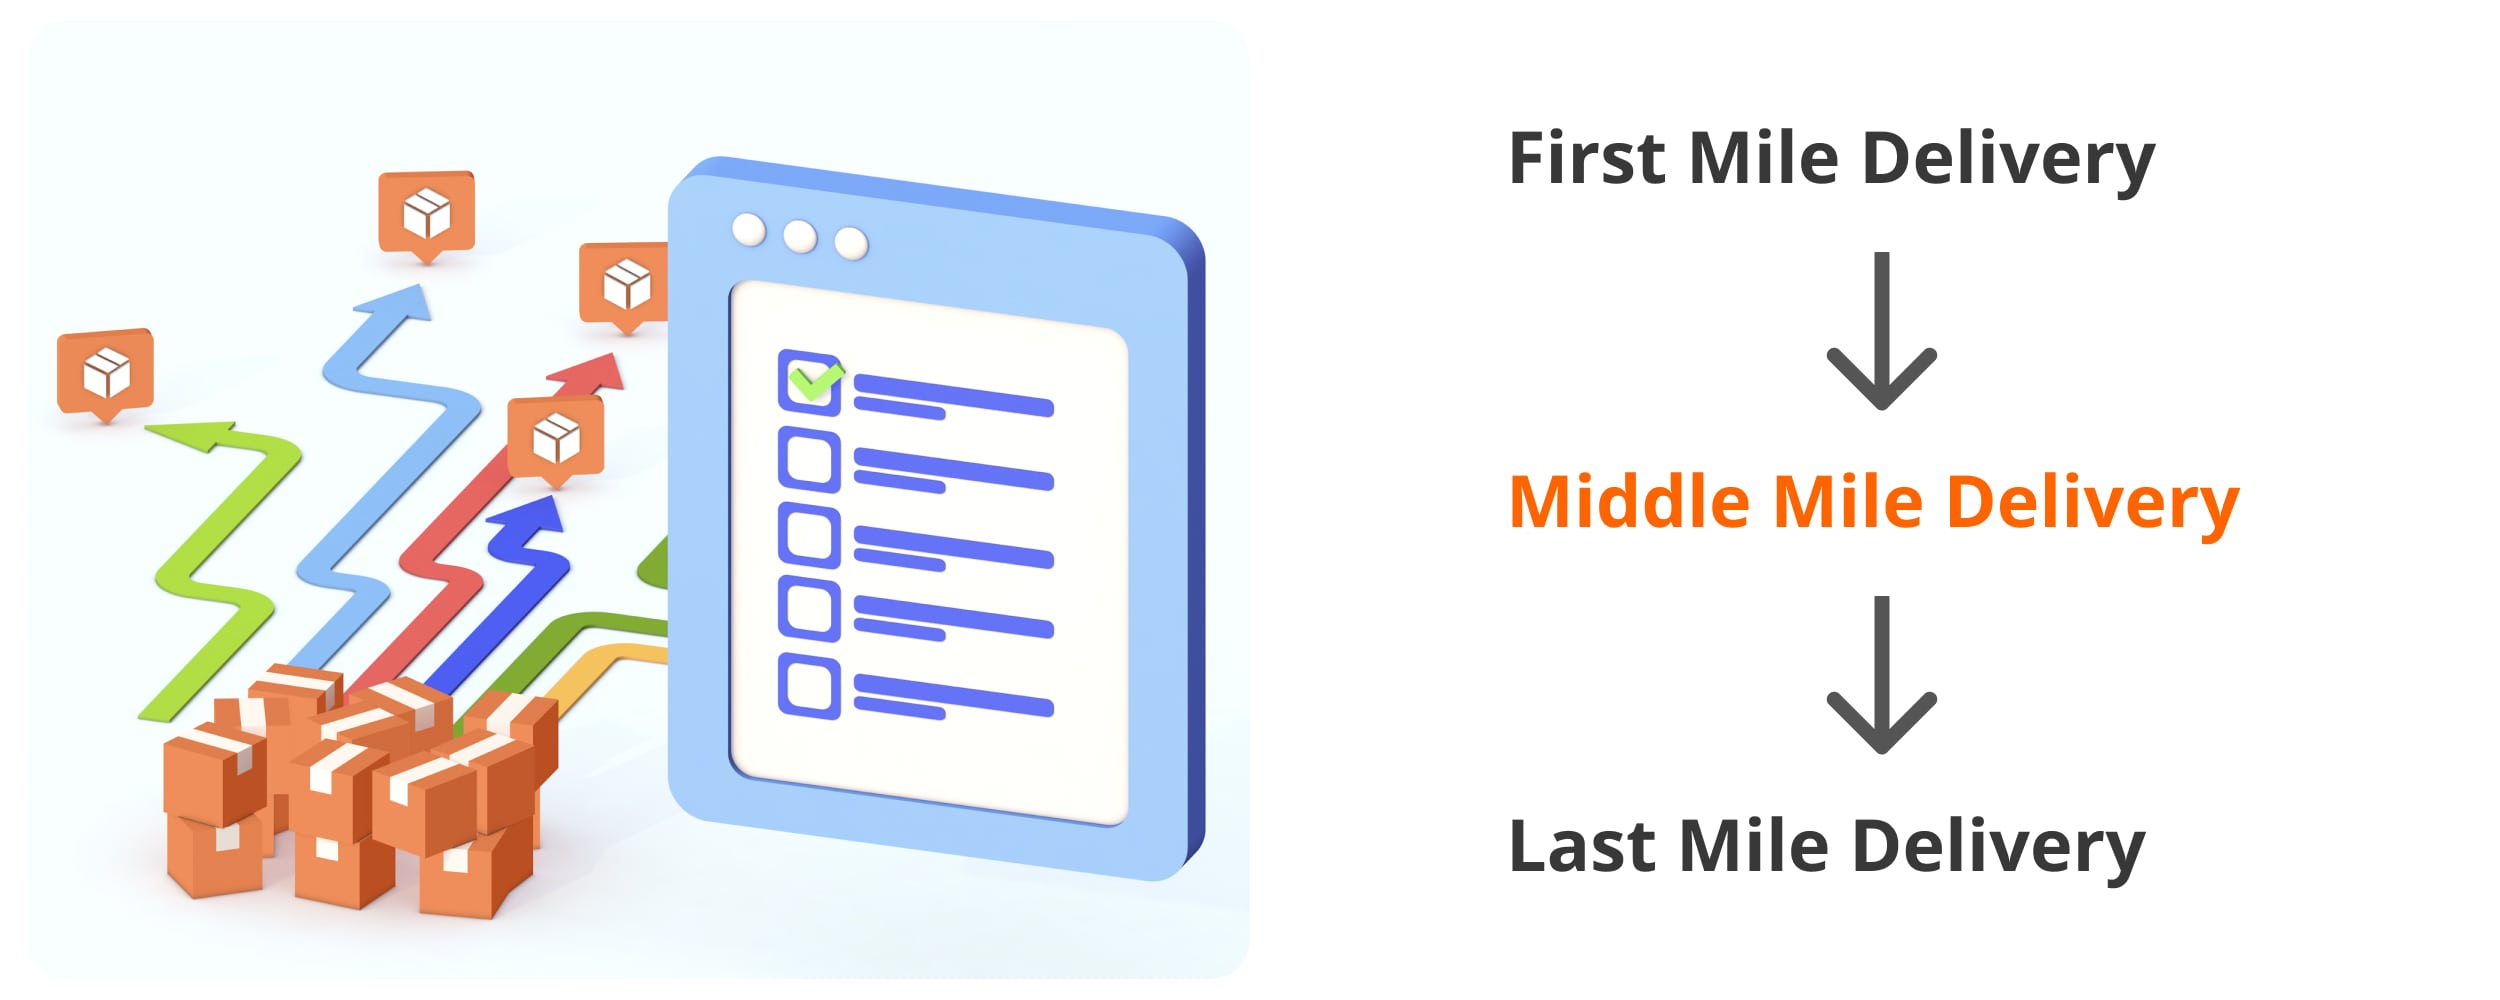 The difference between first mile delivery, middle mile delivery, and last mile delivery.